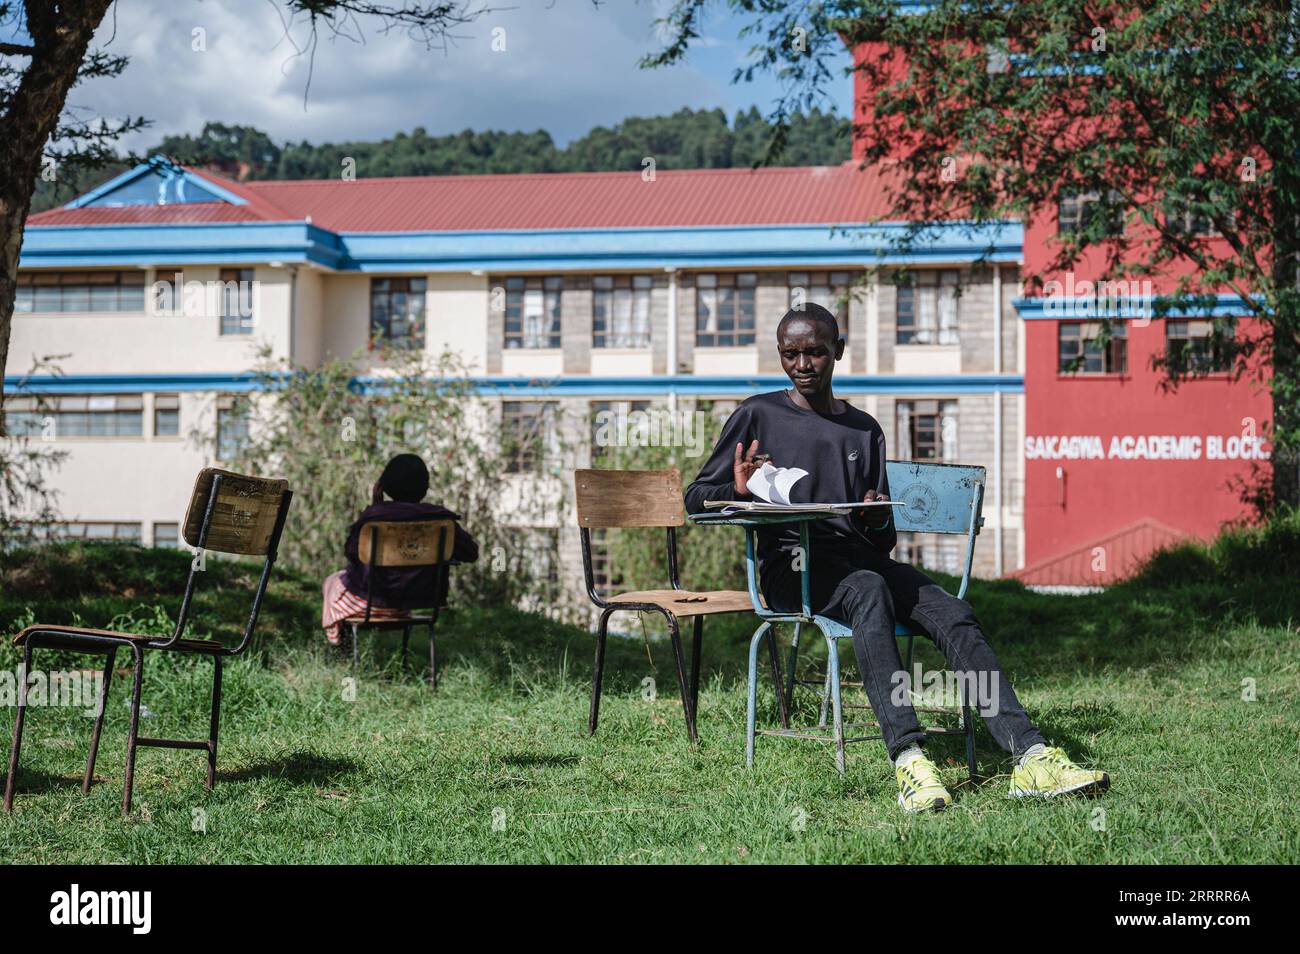 230611 -- ITEN, June 11, 2023 -- Kenyan runner Kelvin Kimtai Chepsigor R is seen at Kisii University in Kisii, Kenya, on June 6, 2023. At nearly 6 am, the first morning light shines upon the landmark arch written with Home of Champions in Iten, the runners gathered here to greet each other with a fist bump, stretch their muscles, and prepare for the first training session of the day. With an average altitude of 2,400 meters, Iten sits in the west of Kenya, near the Great Rift Valley of East Africa. It is an ideal long-distance running training place and is the cradle of many world-class middle Stock Photo